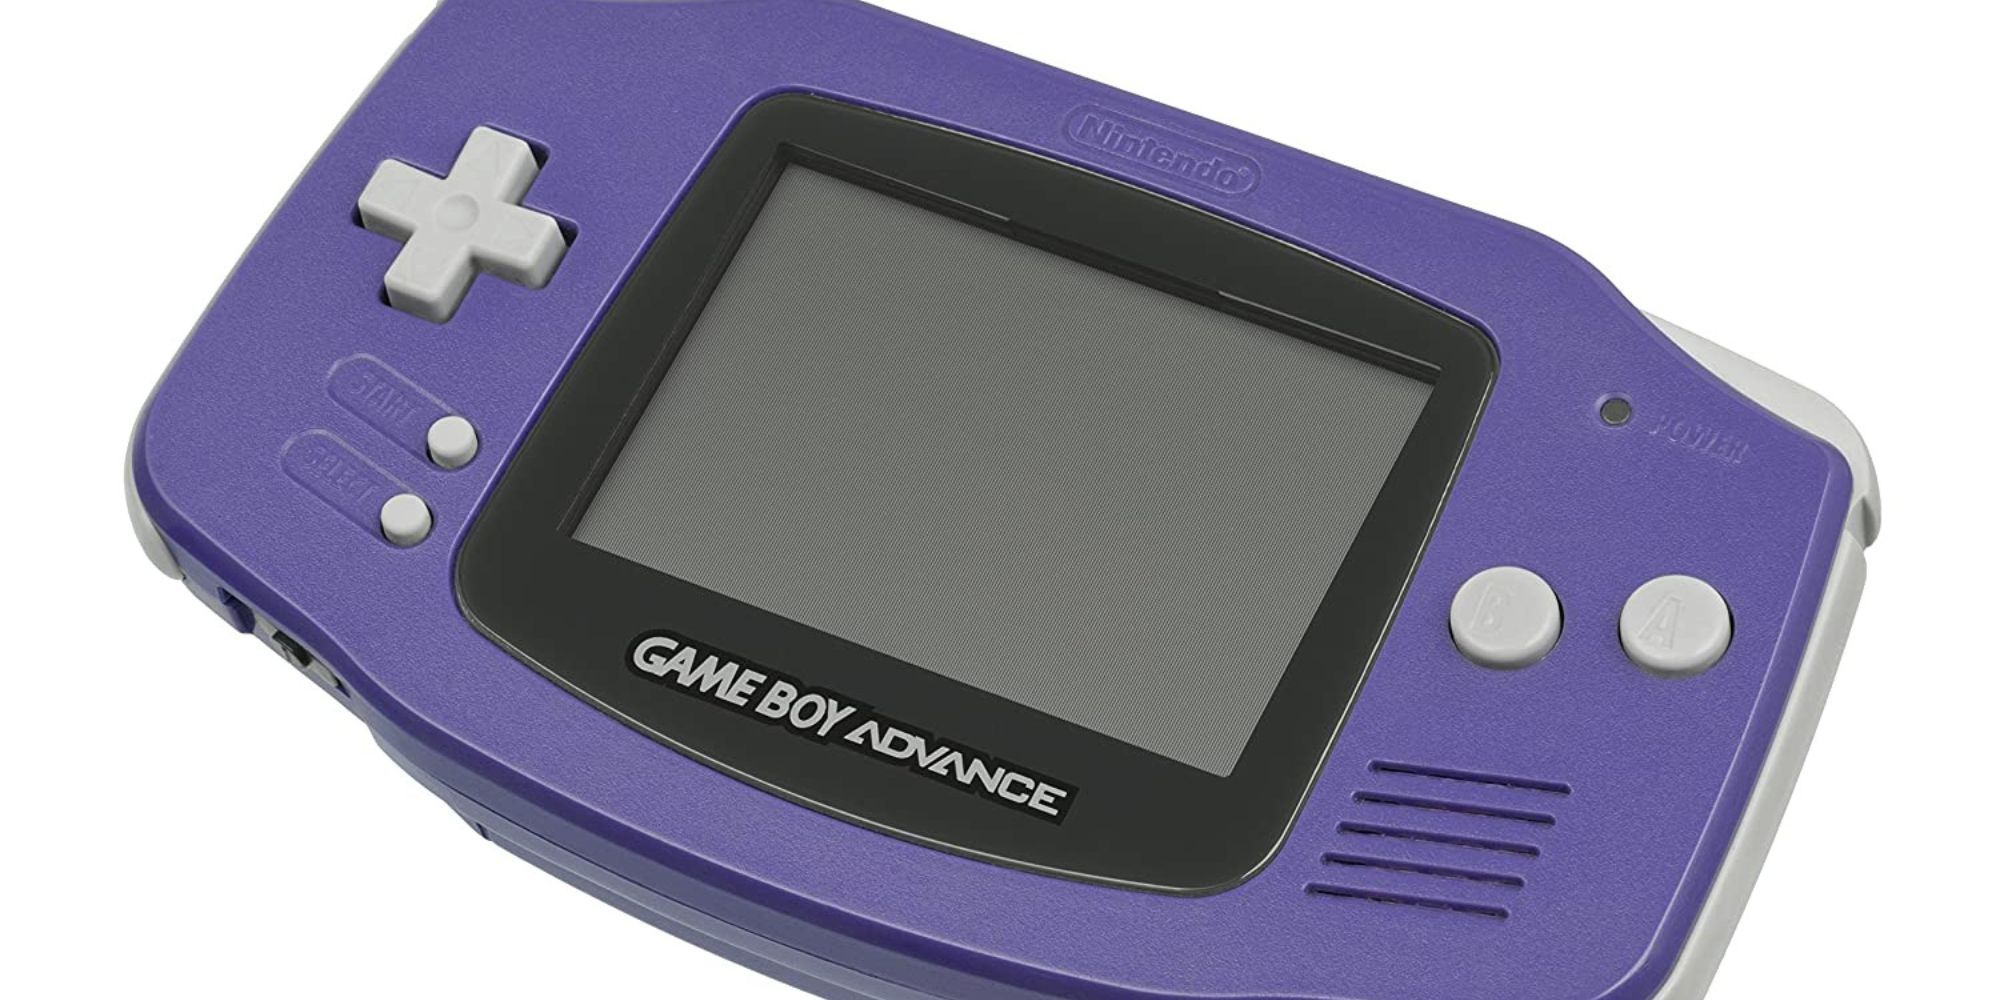 Game Boy Advance handheld console by nintendo